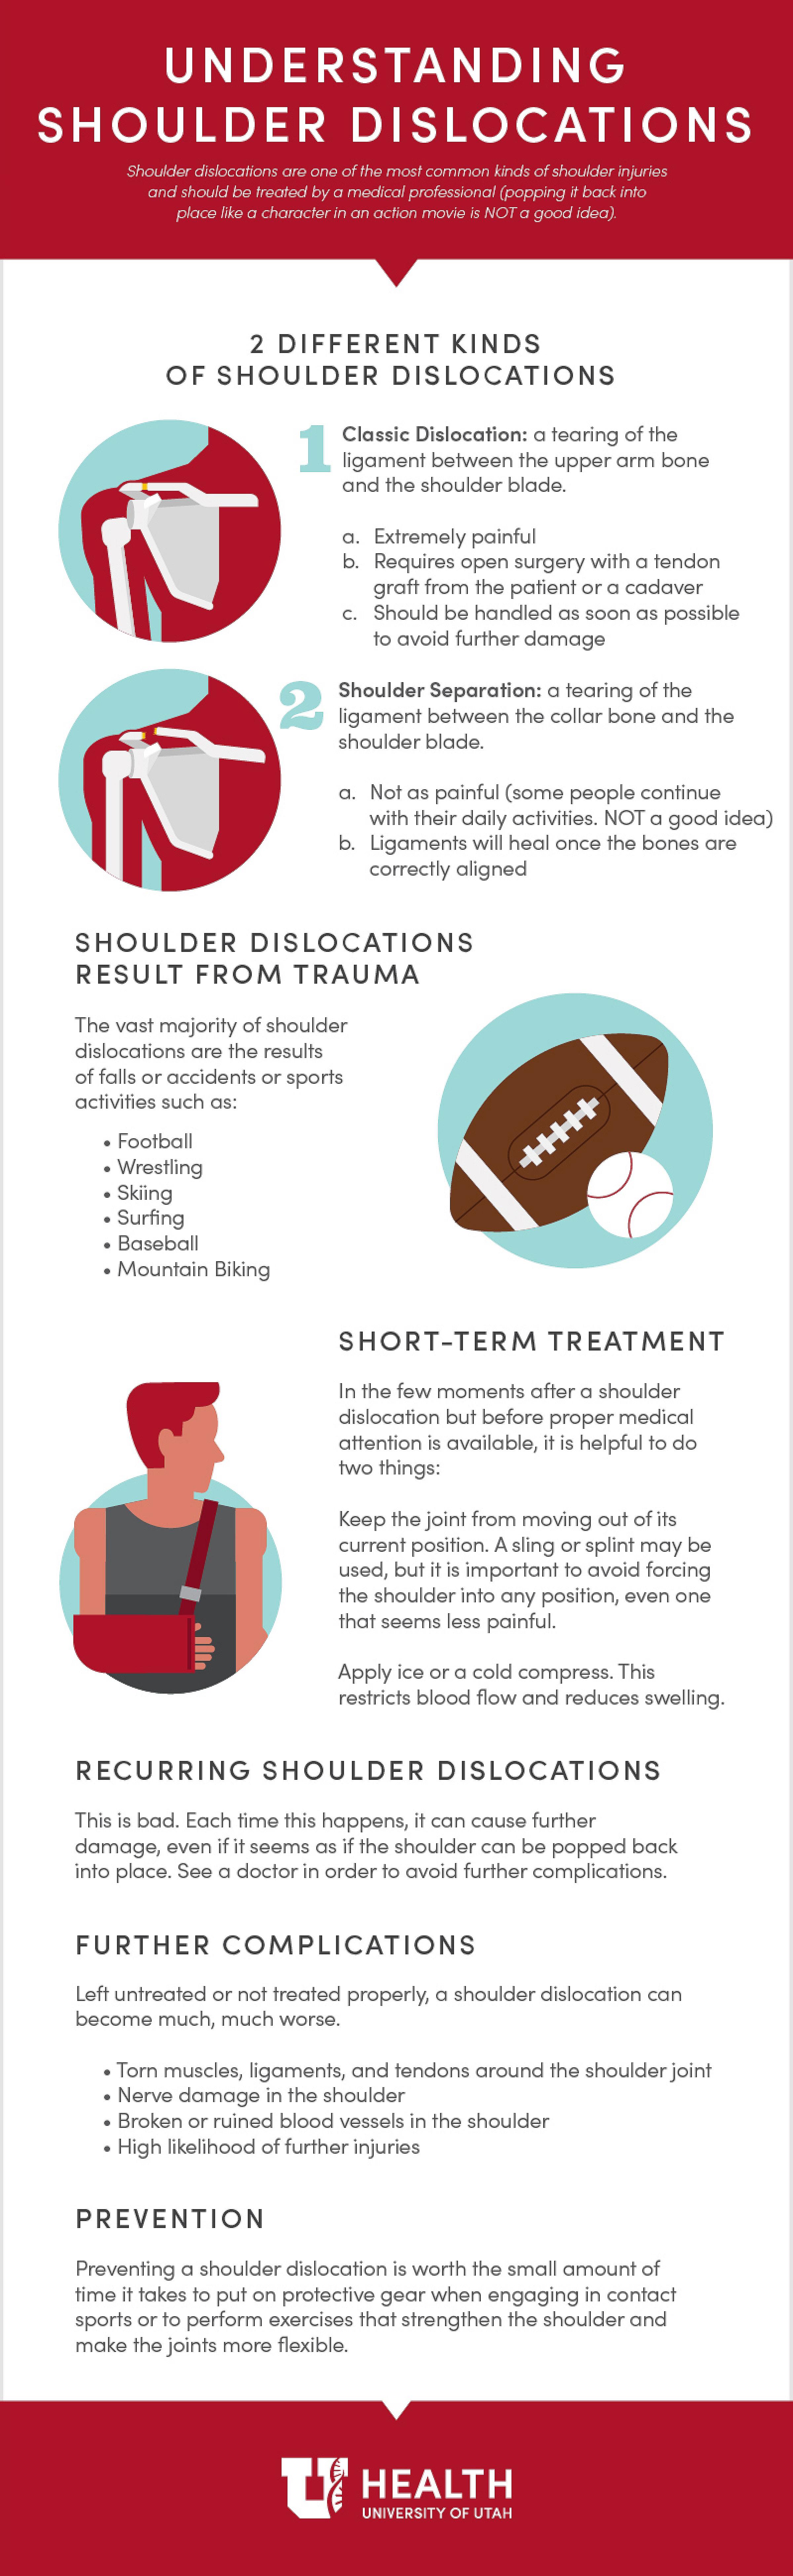 Shoulder dislocations infographic